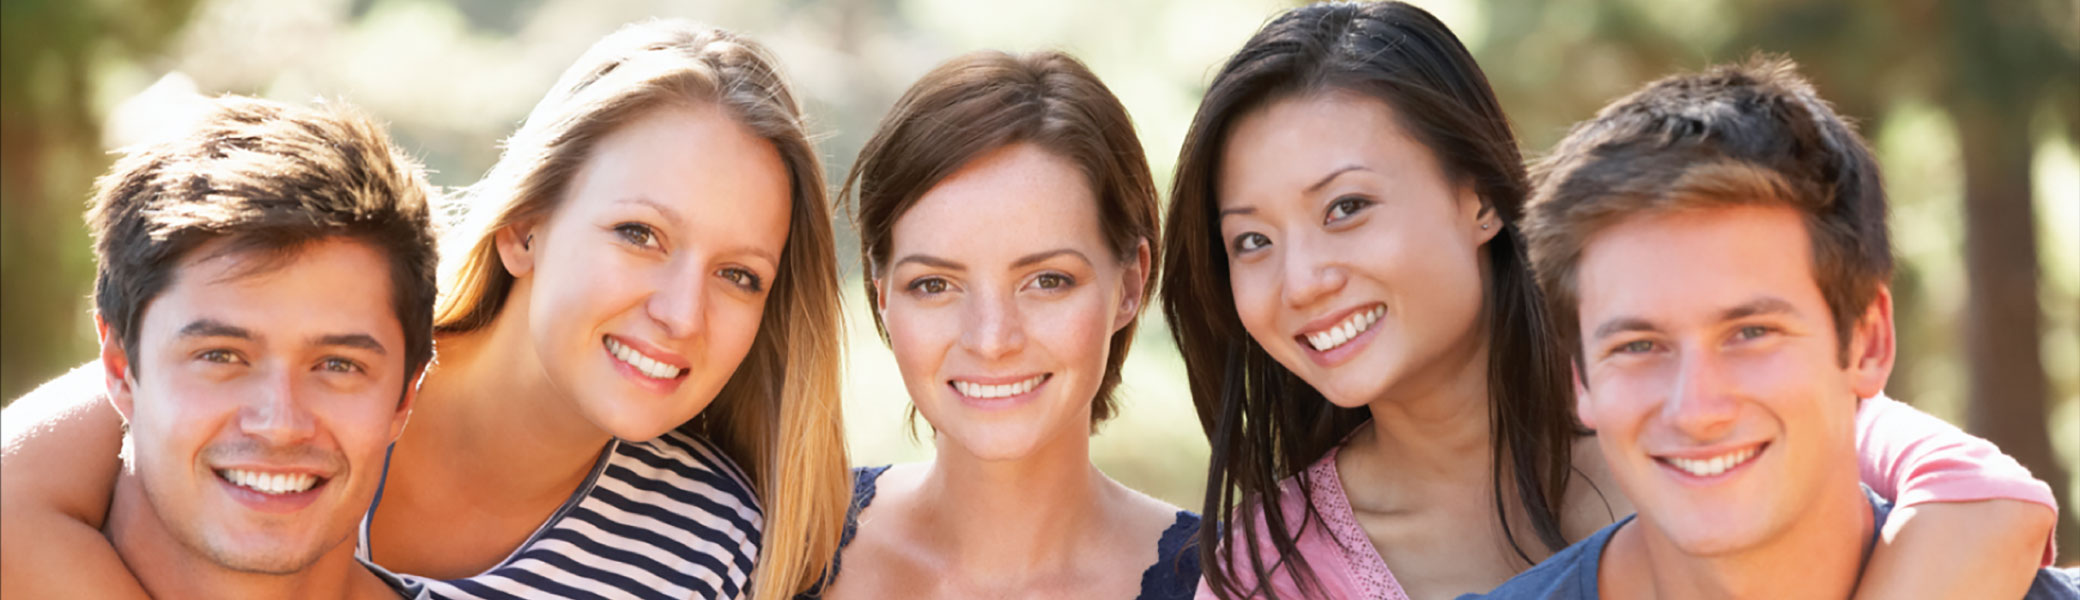 Complete Cosmetic Dentistry